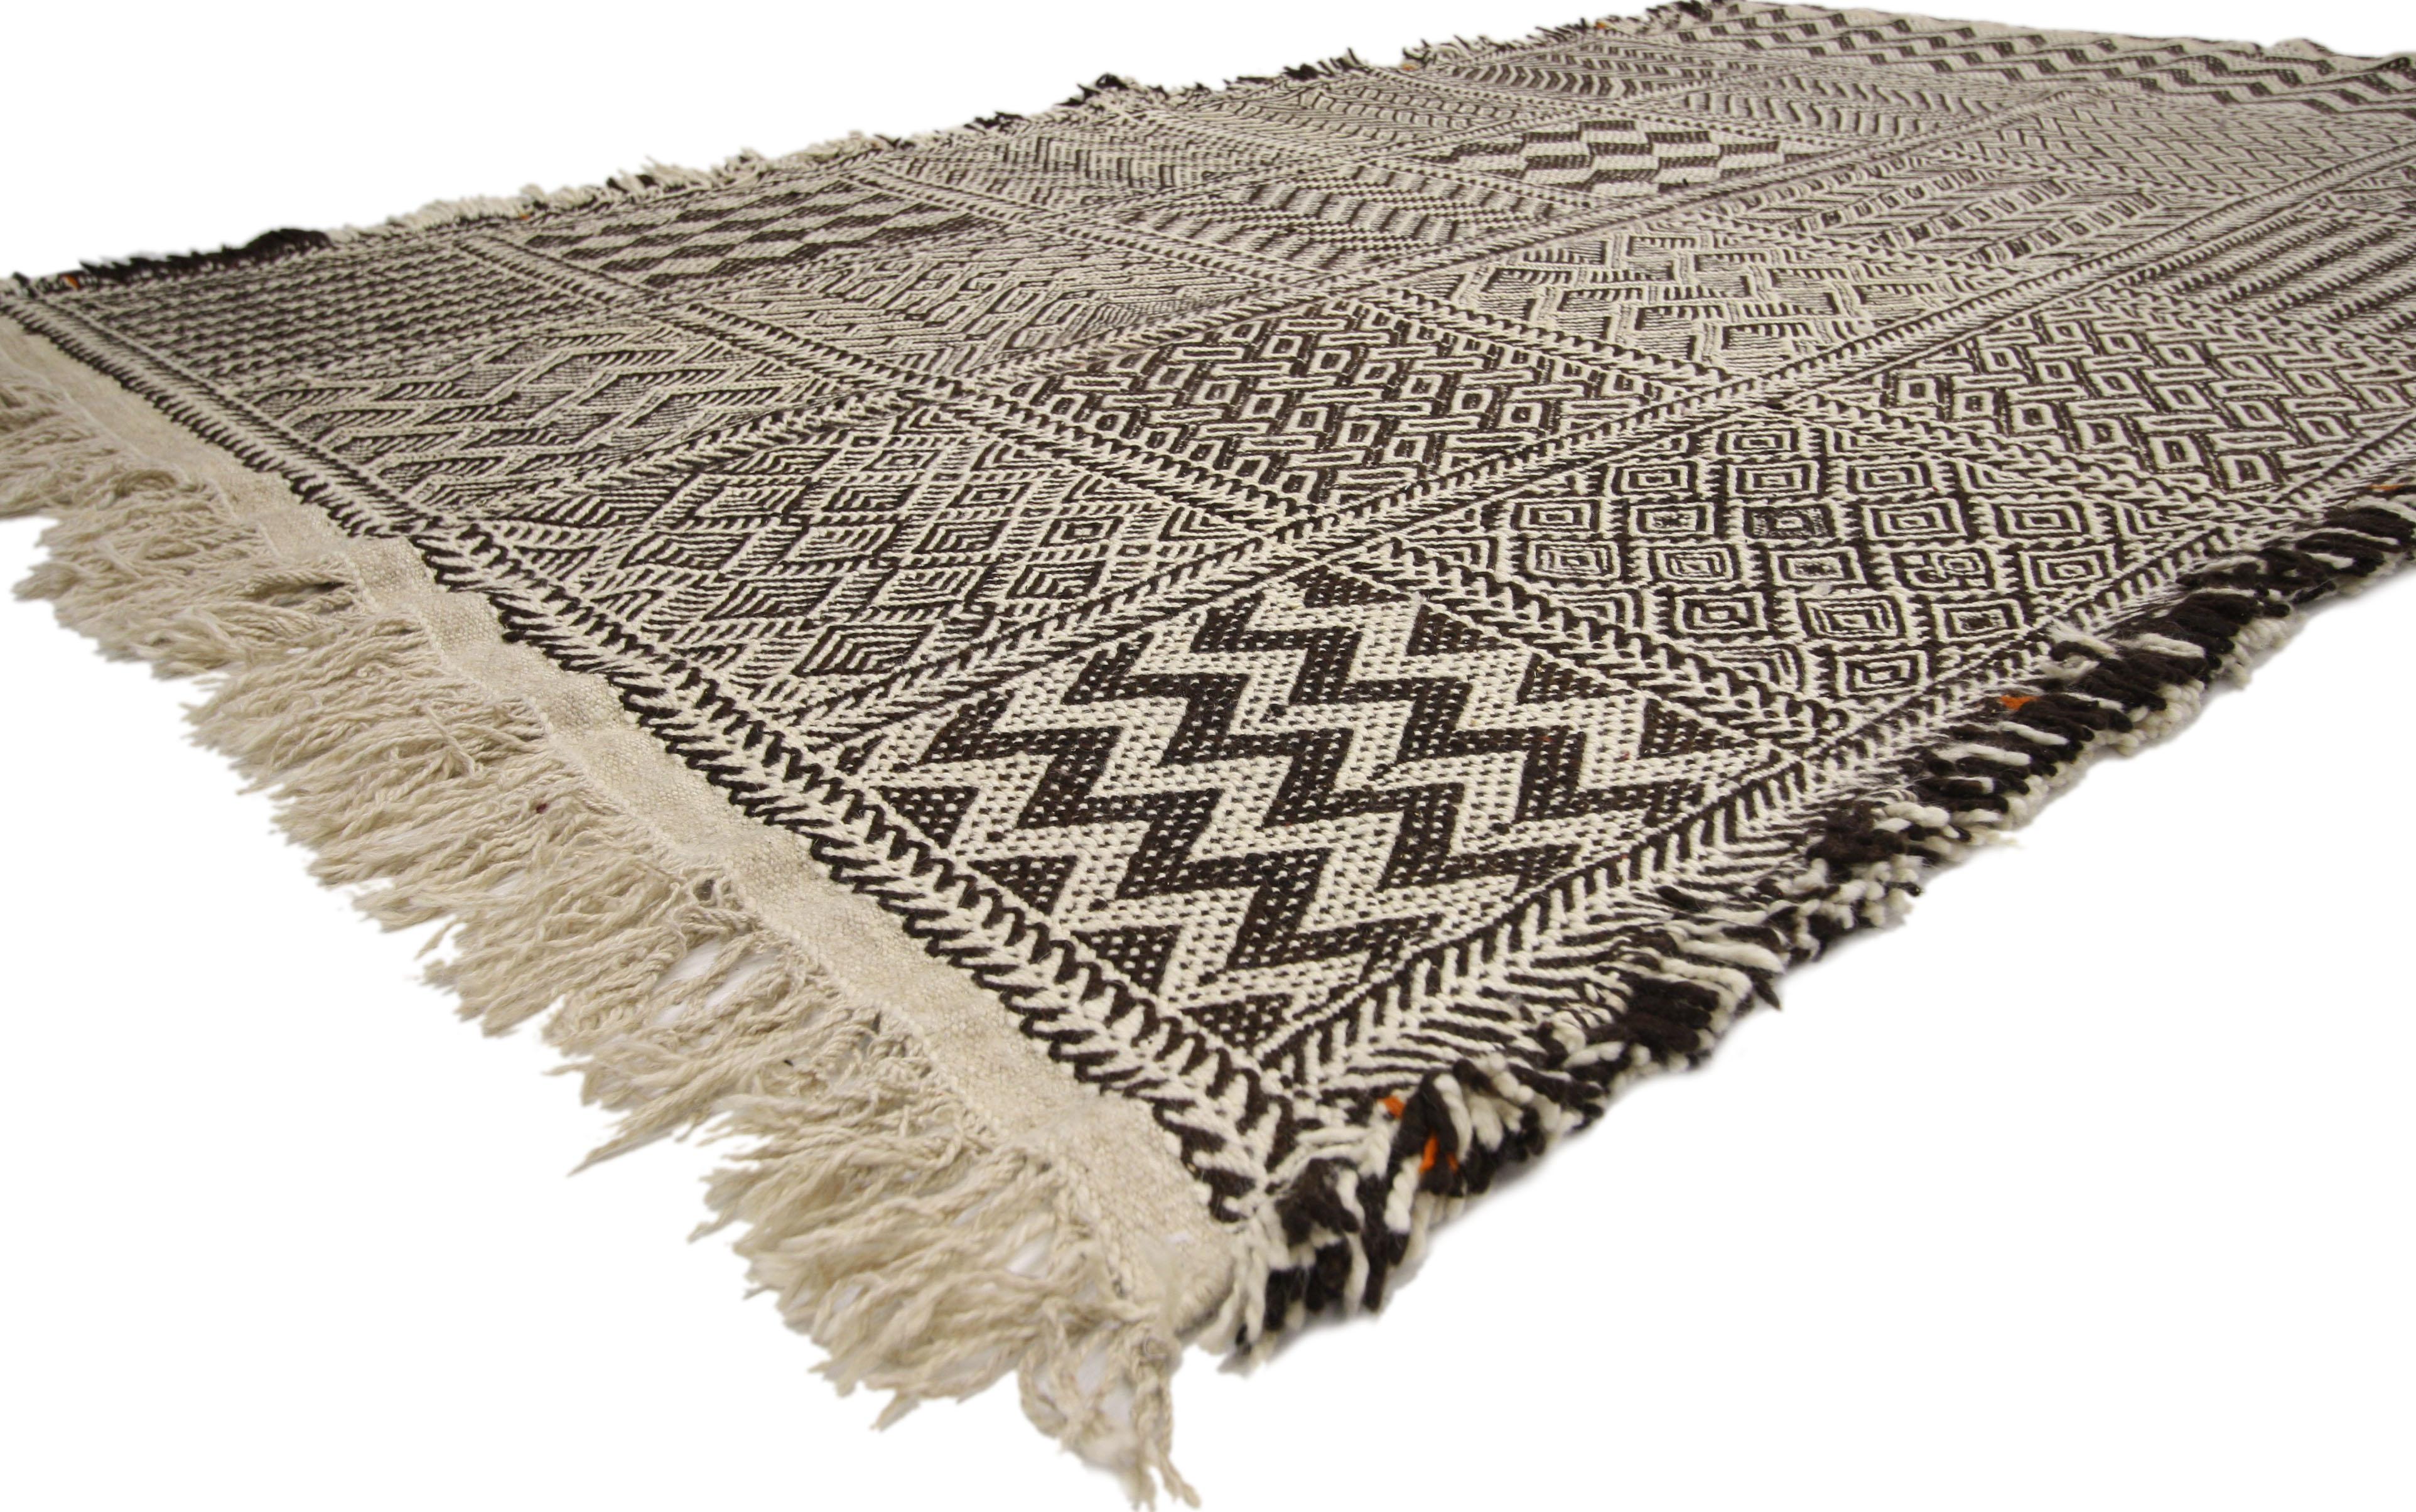 20703, vintage Zanafi Moroccan Kilim rug with Zillij style, Moroccan tile pattern rug. This handwoven wool vintage Berber Zanafi Moroccan Kilim rug features a Moroccan tile pattern, leaving the viewer enamored. The flat-weave Moroccan Kilim displays